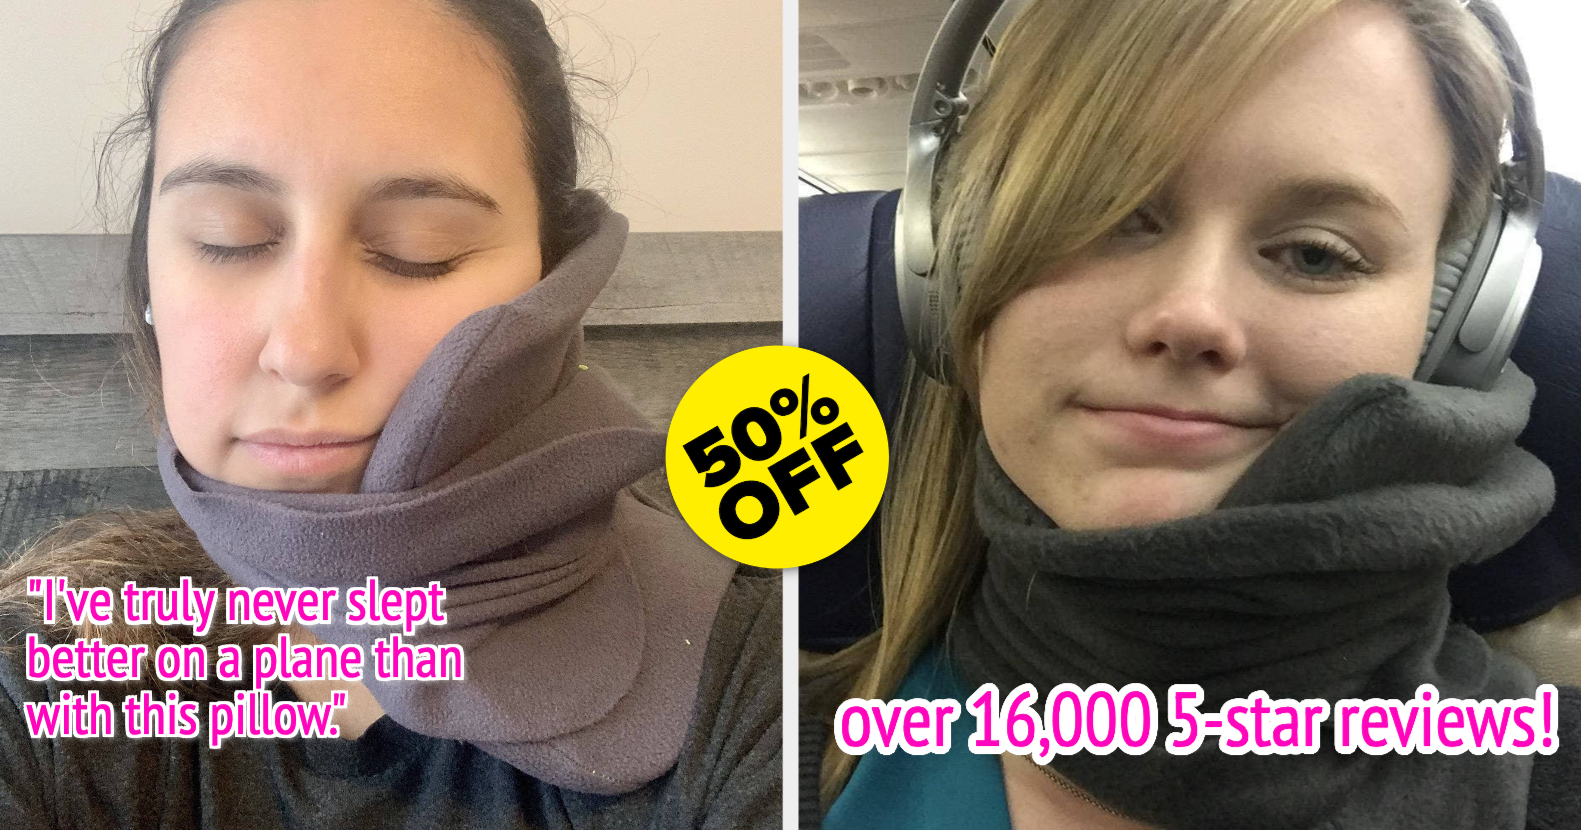 The Silly-Looking Trtl Travel Pillow Is the Only Way I Can Sleep on Flights